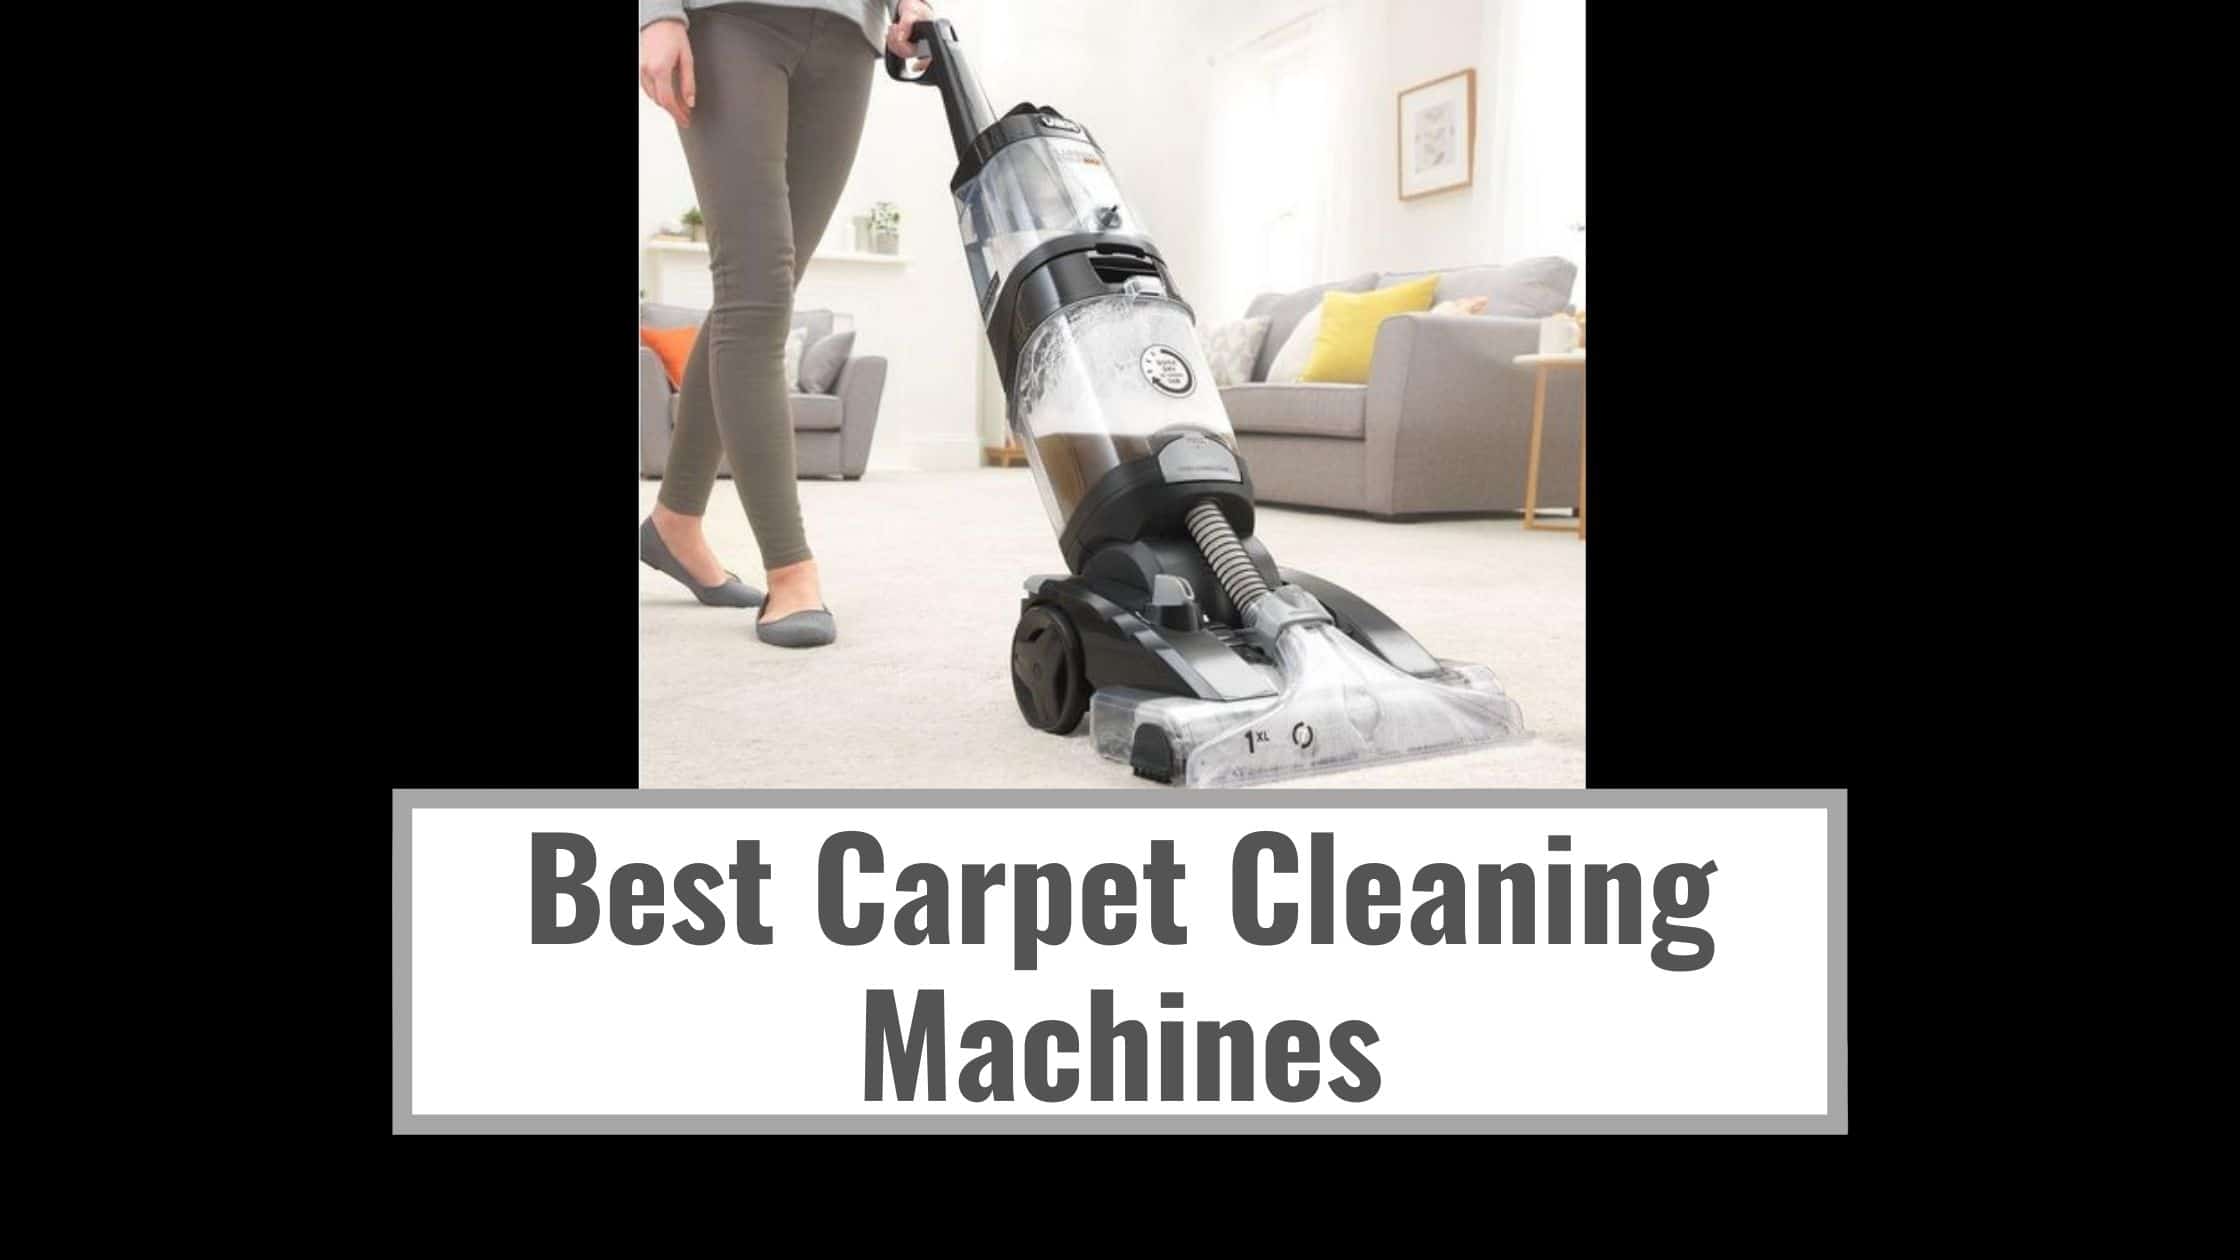 Best Carpet Cleaning Machines